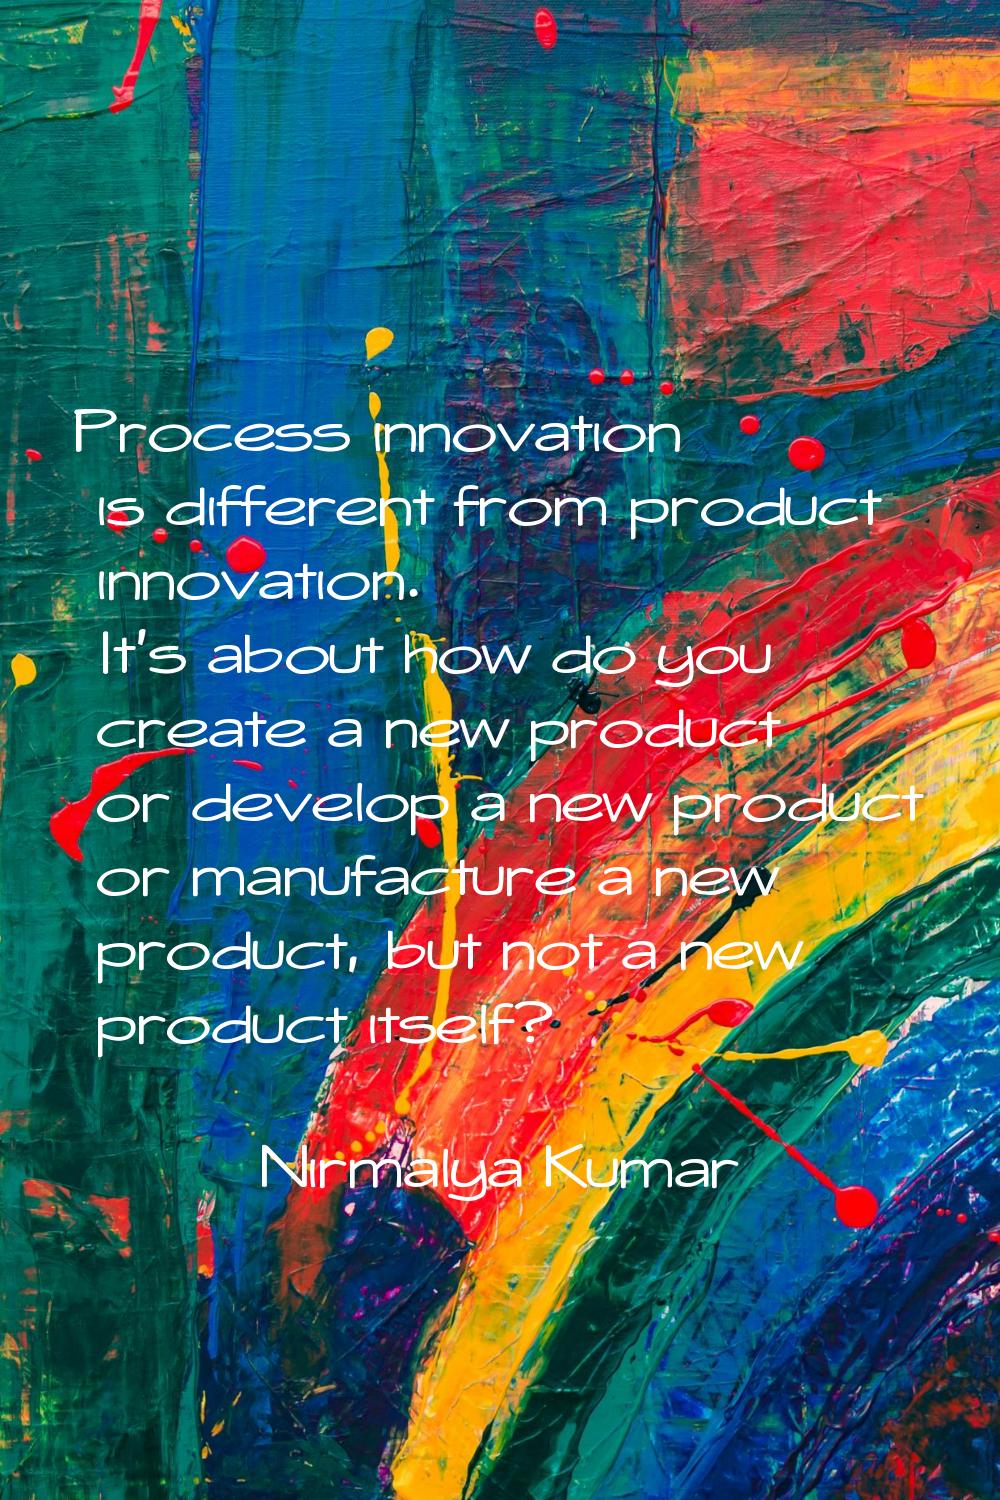 Process innovation is different from product innovation. It's about how do you create a new product